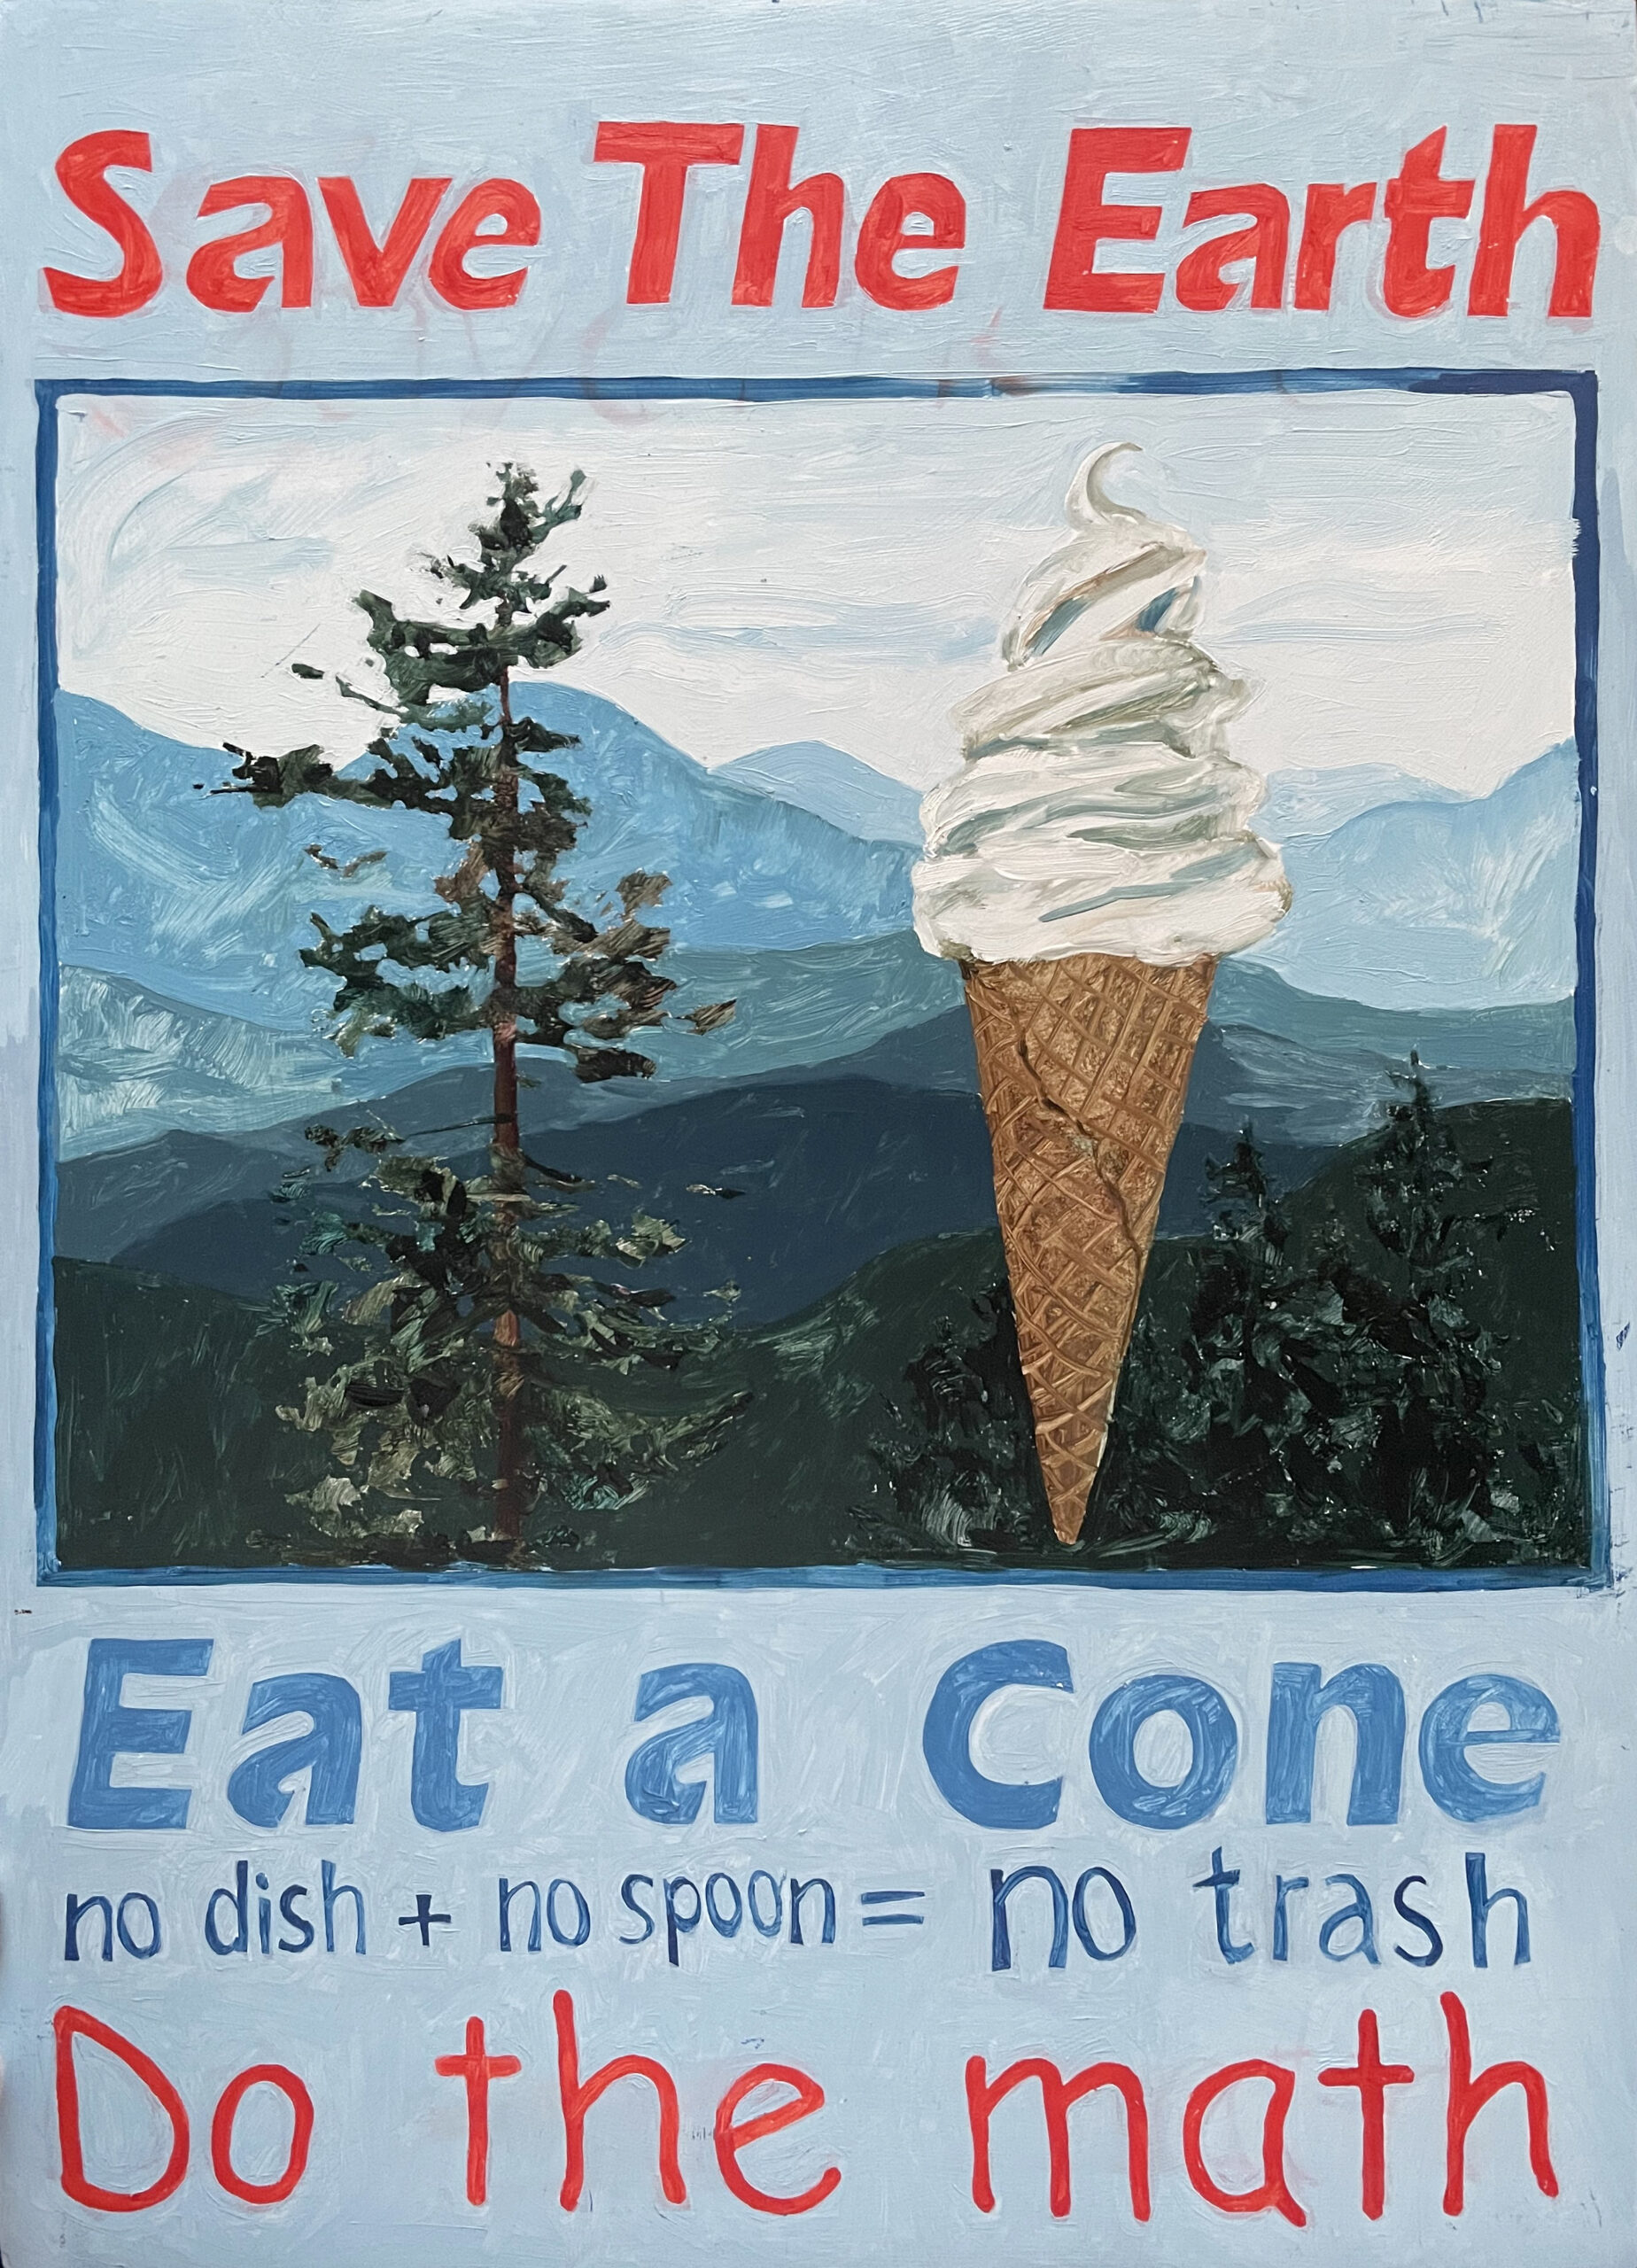 Joy Cone Co Has an Important Message to Share